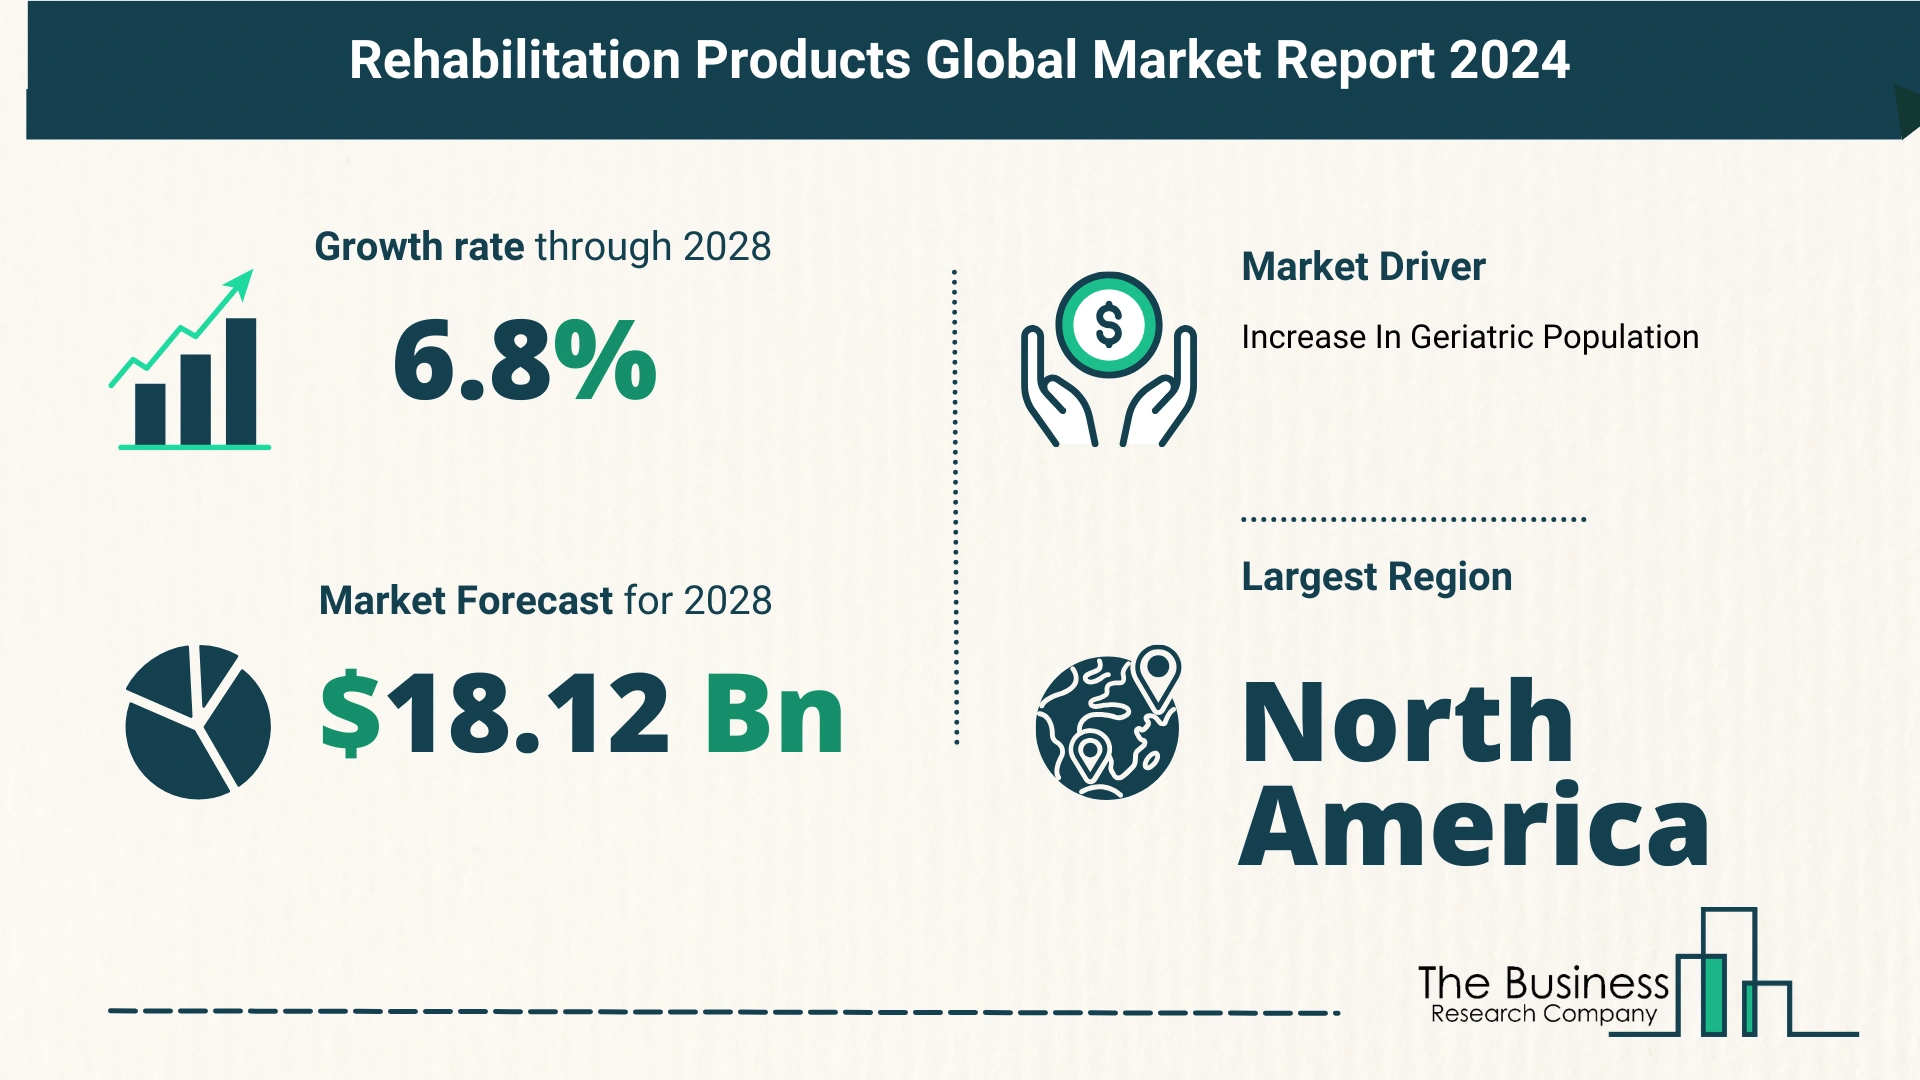 Top 5 Insights From The Rehabilitation Products Market Report 2024